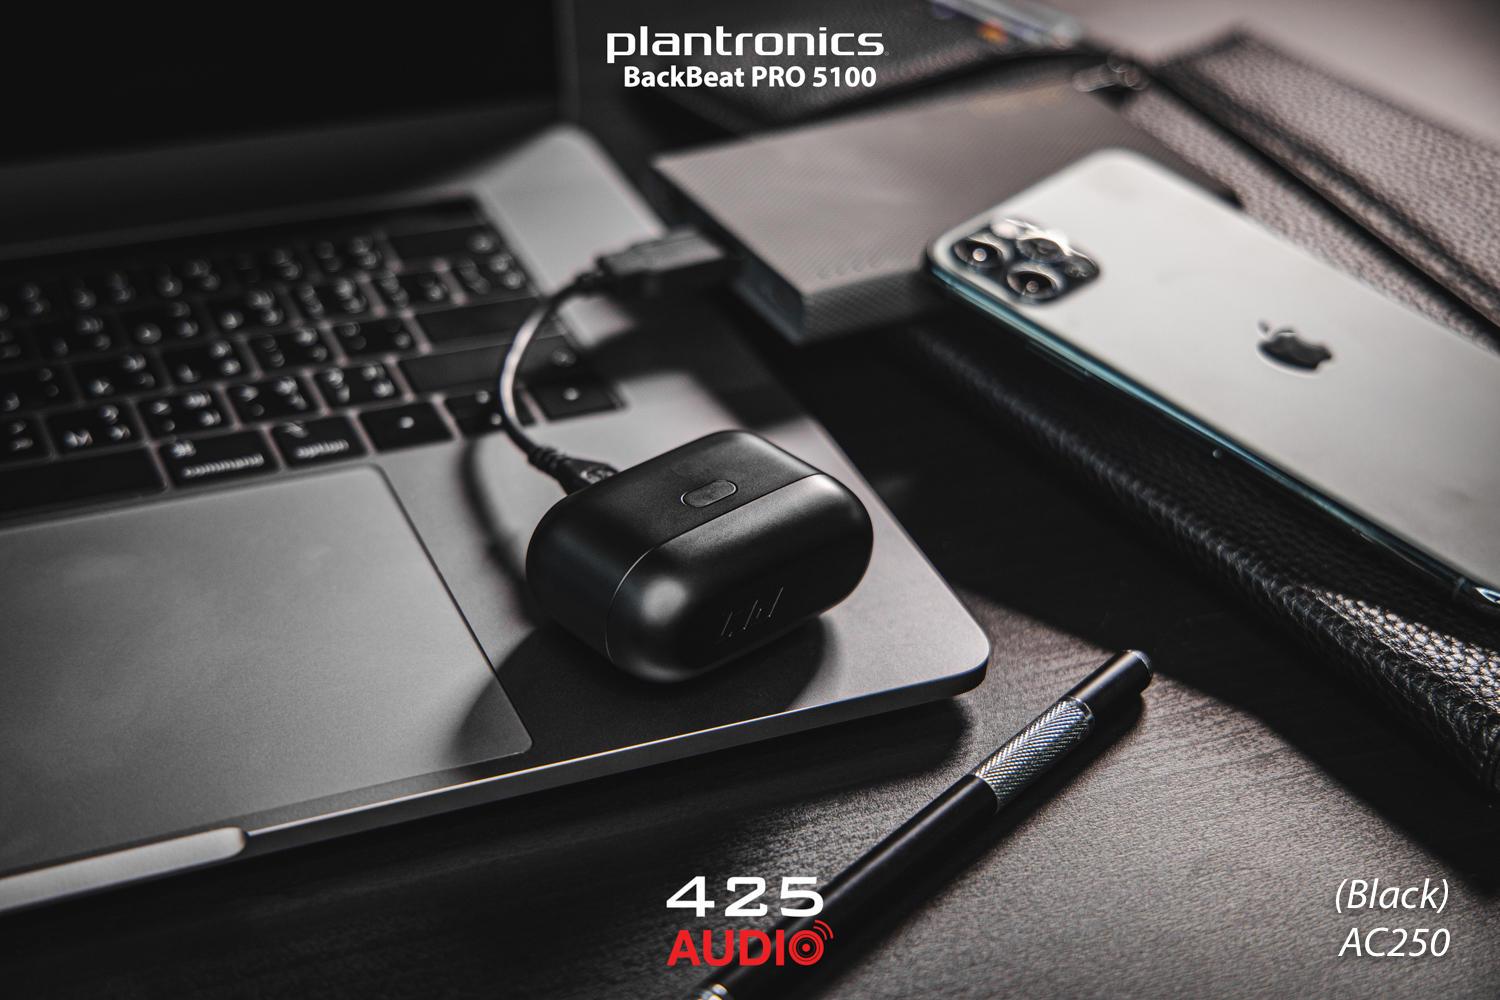 plantronics,plantronicsbackbeat,plantronicsbackbeatpro5100,4mics,windsmart,noisecancelling,goodcall,premiumcall,stereo,stereocall,stereosound,deepbass,IP54,fit,comfort